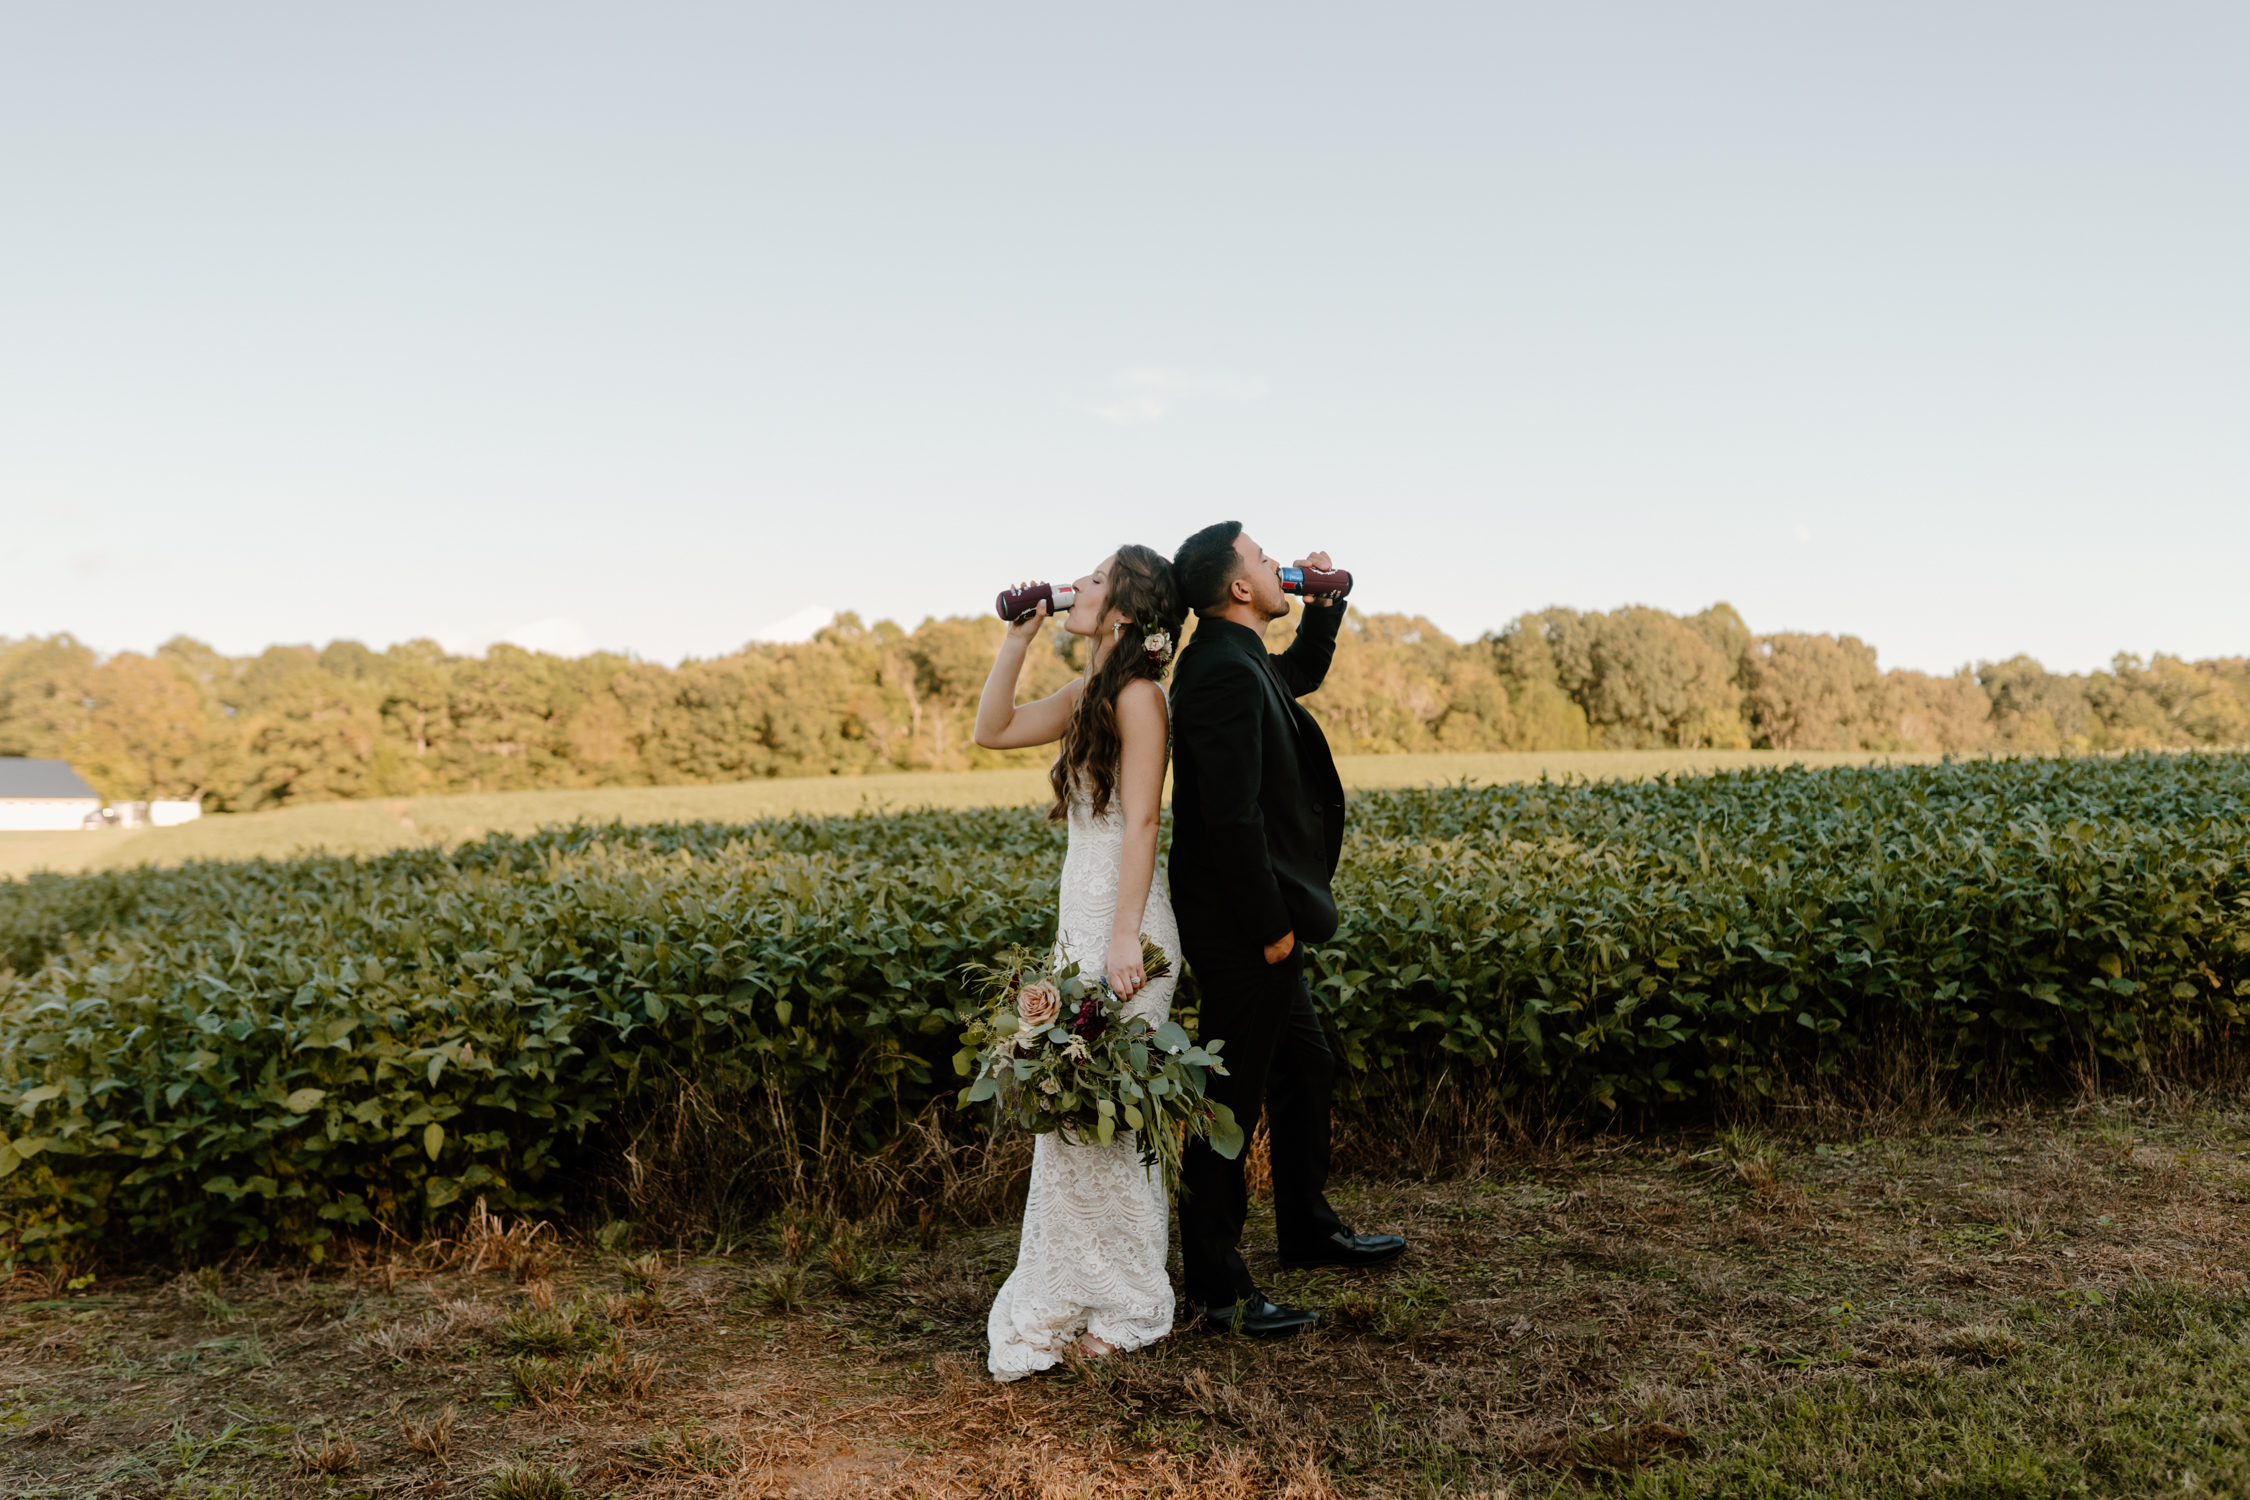 Tips on having the best wedding for you by North Carolina wedding and elopement photographer